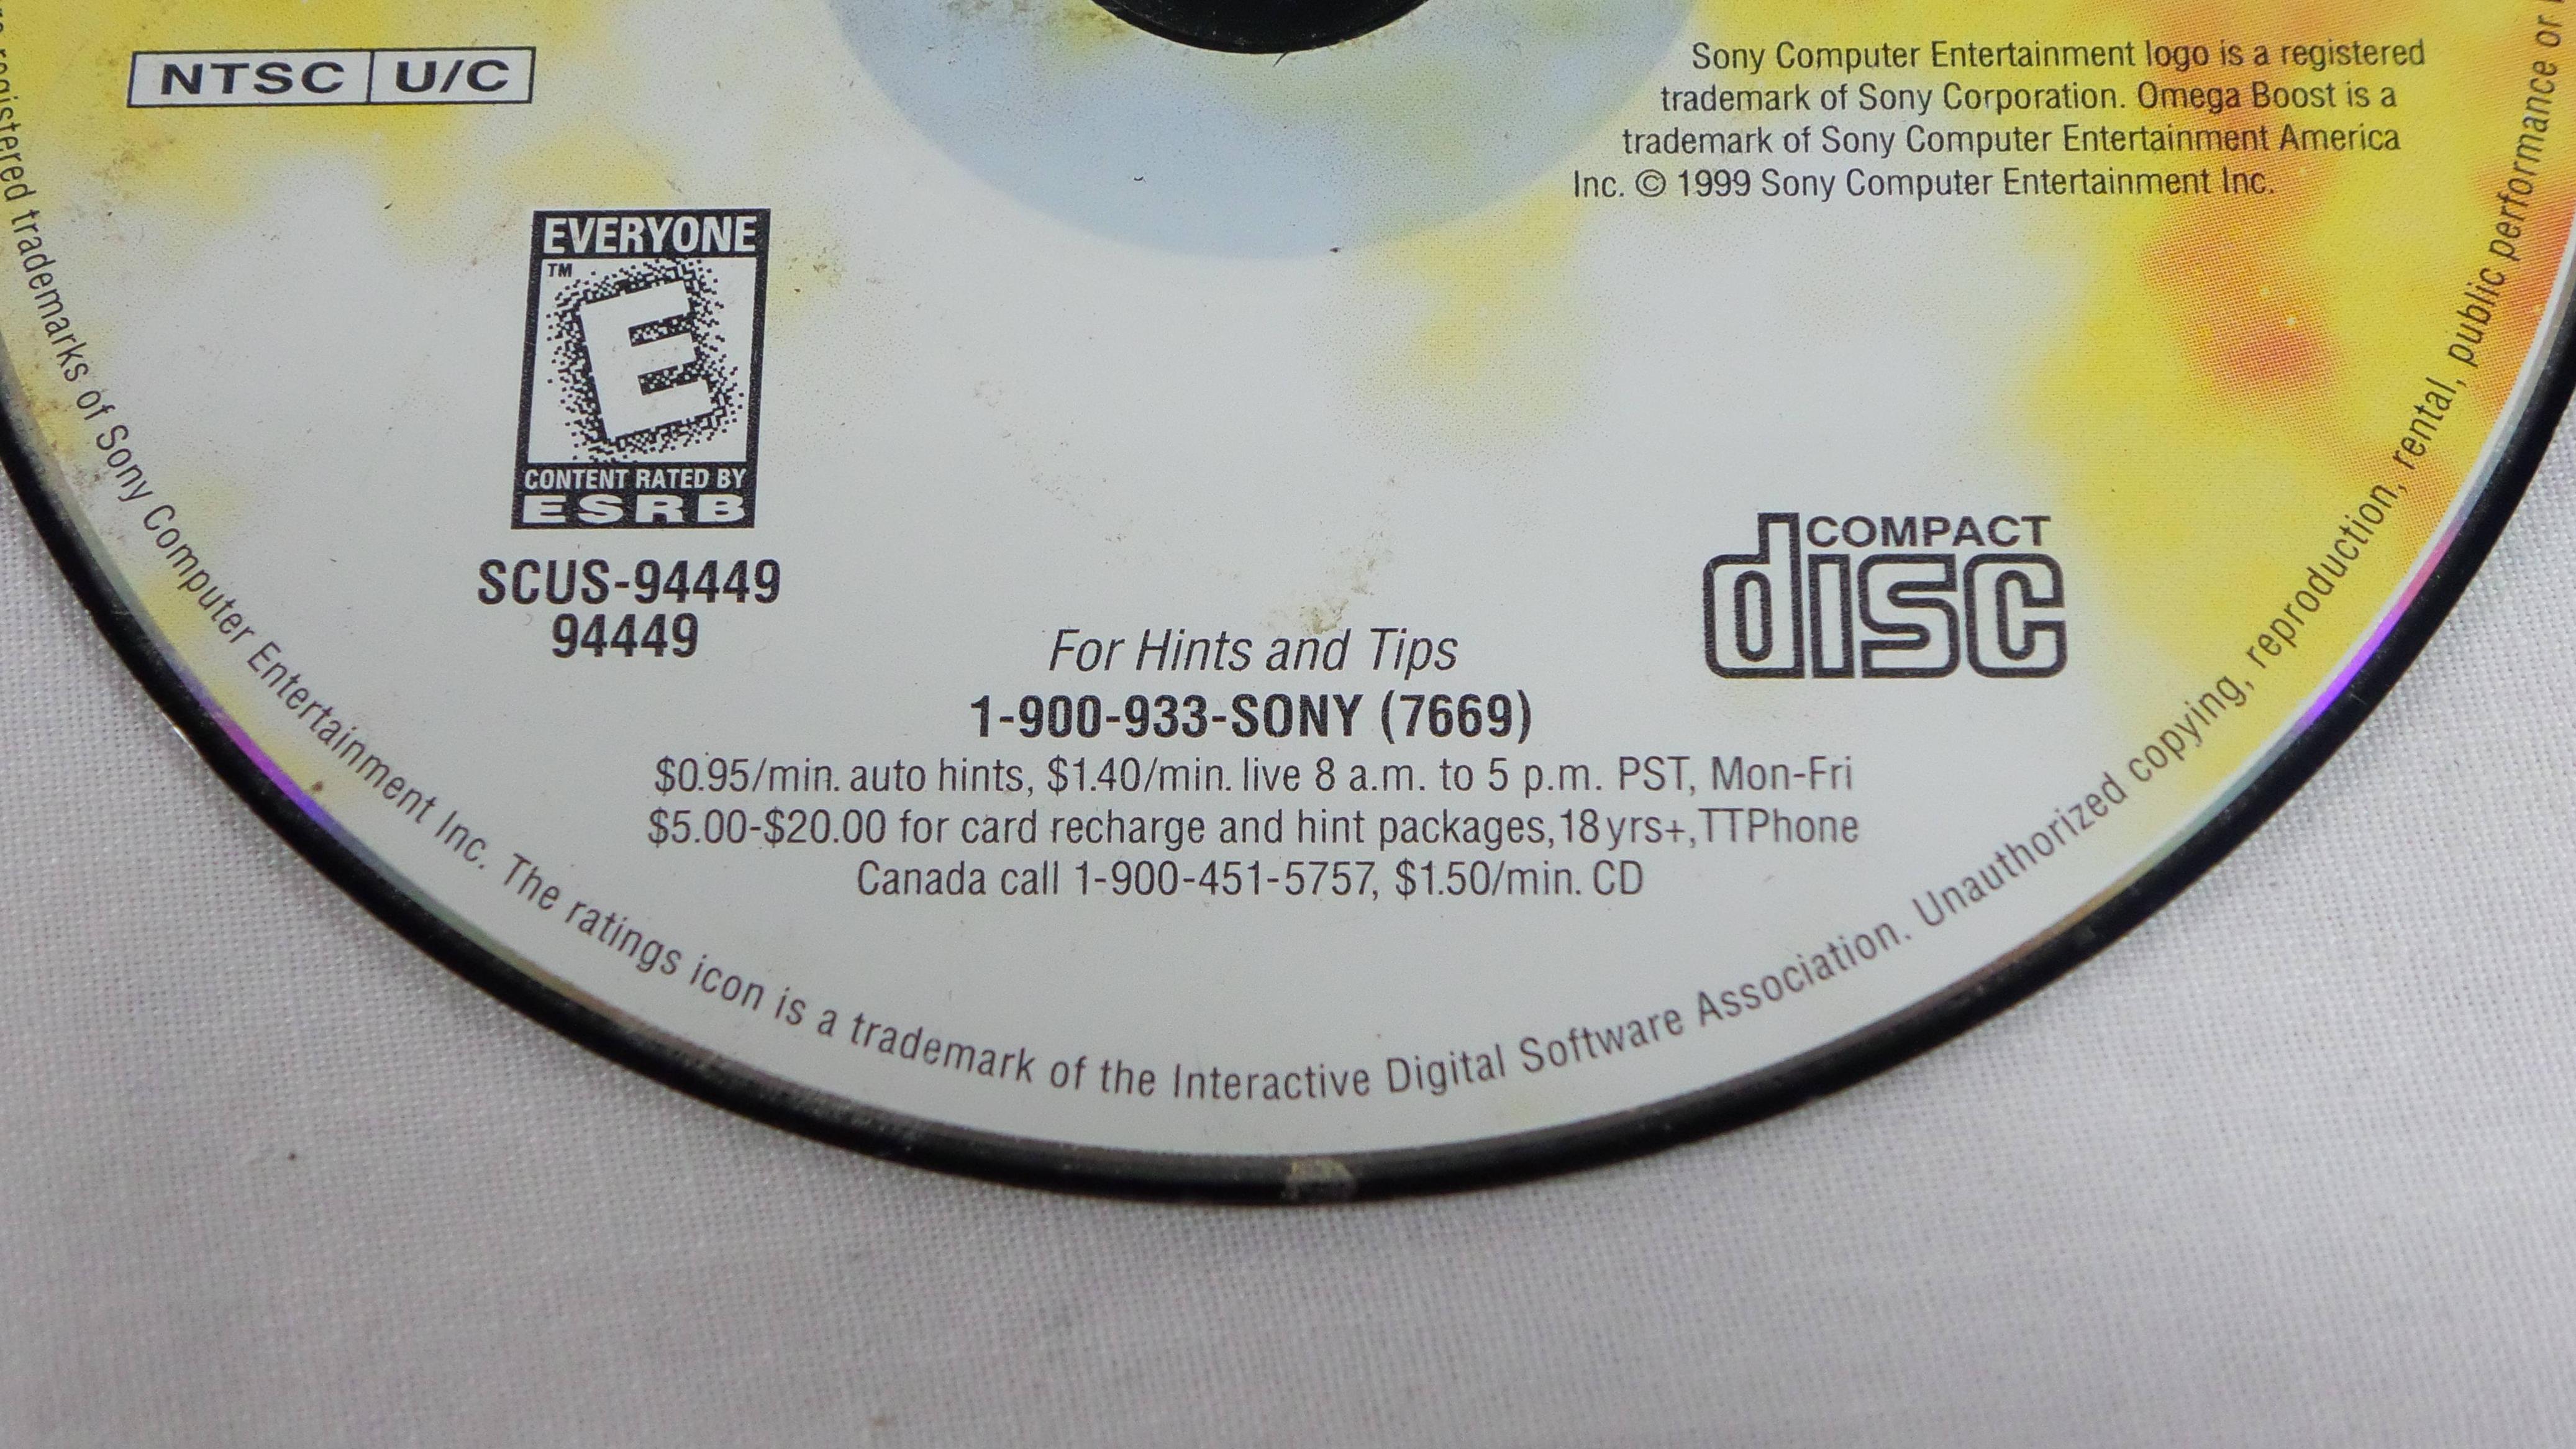 compact disc - Ntsc UC Sony Computer Entertainment logo is a registered trademark of Sony Corporation Omega Boost is a trademark of Sony Computer Entertainment America Inc 1999 Sony Computer Entertainment Inca Everyone tered trademarks of ental public per